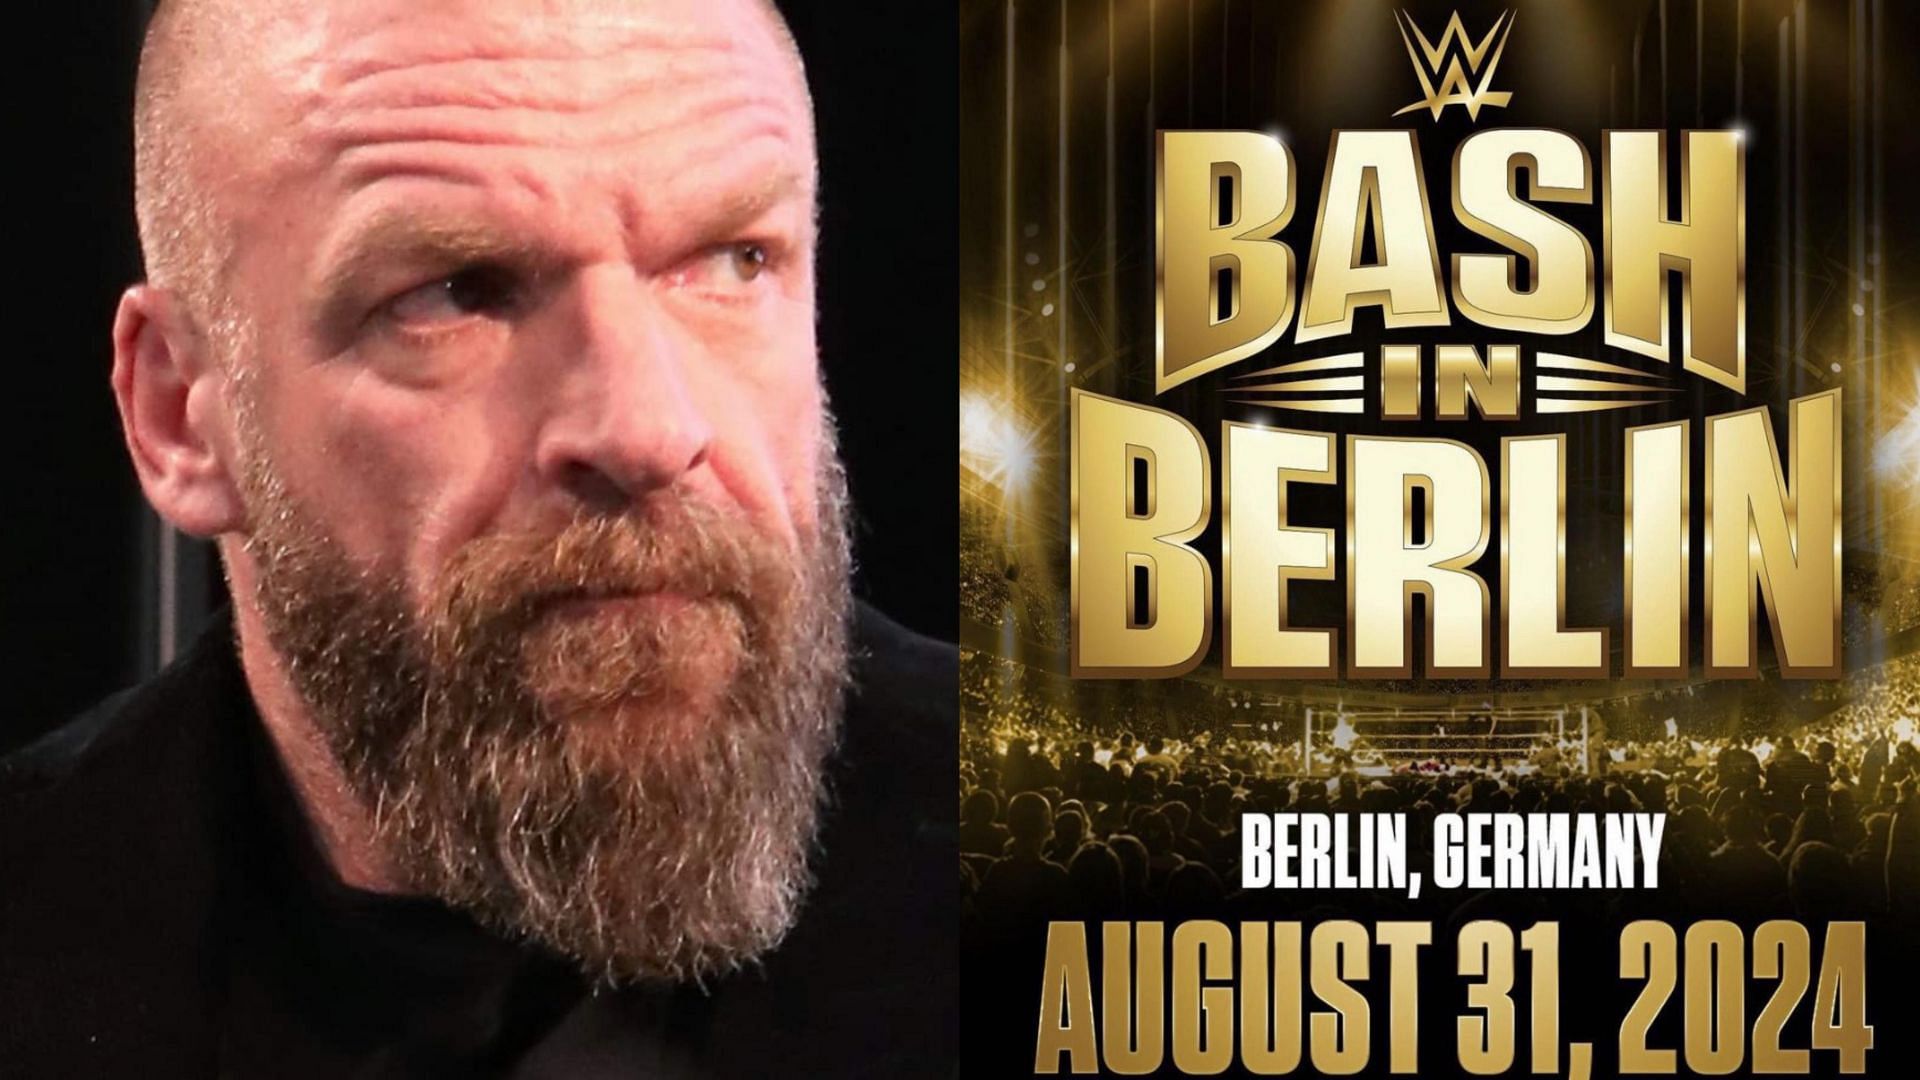 Who should main event Bash in Berlin? 